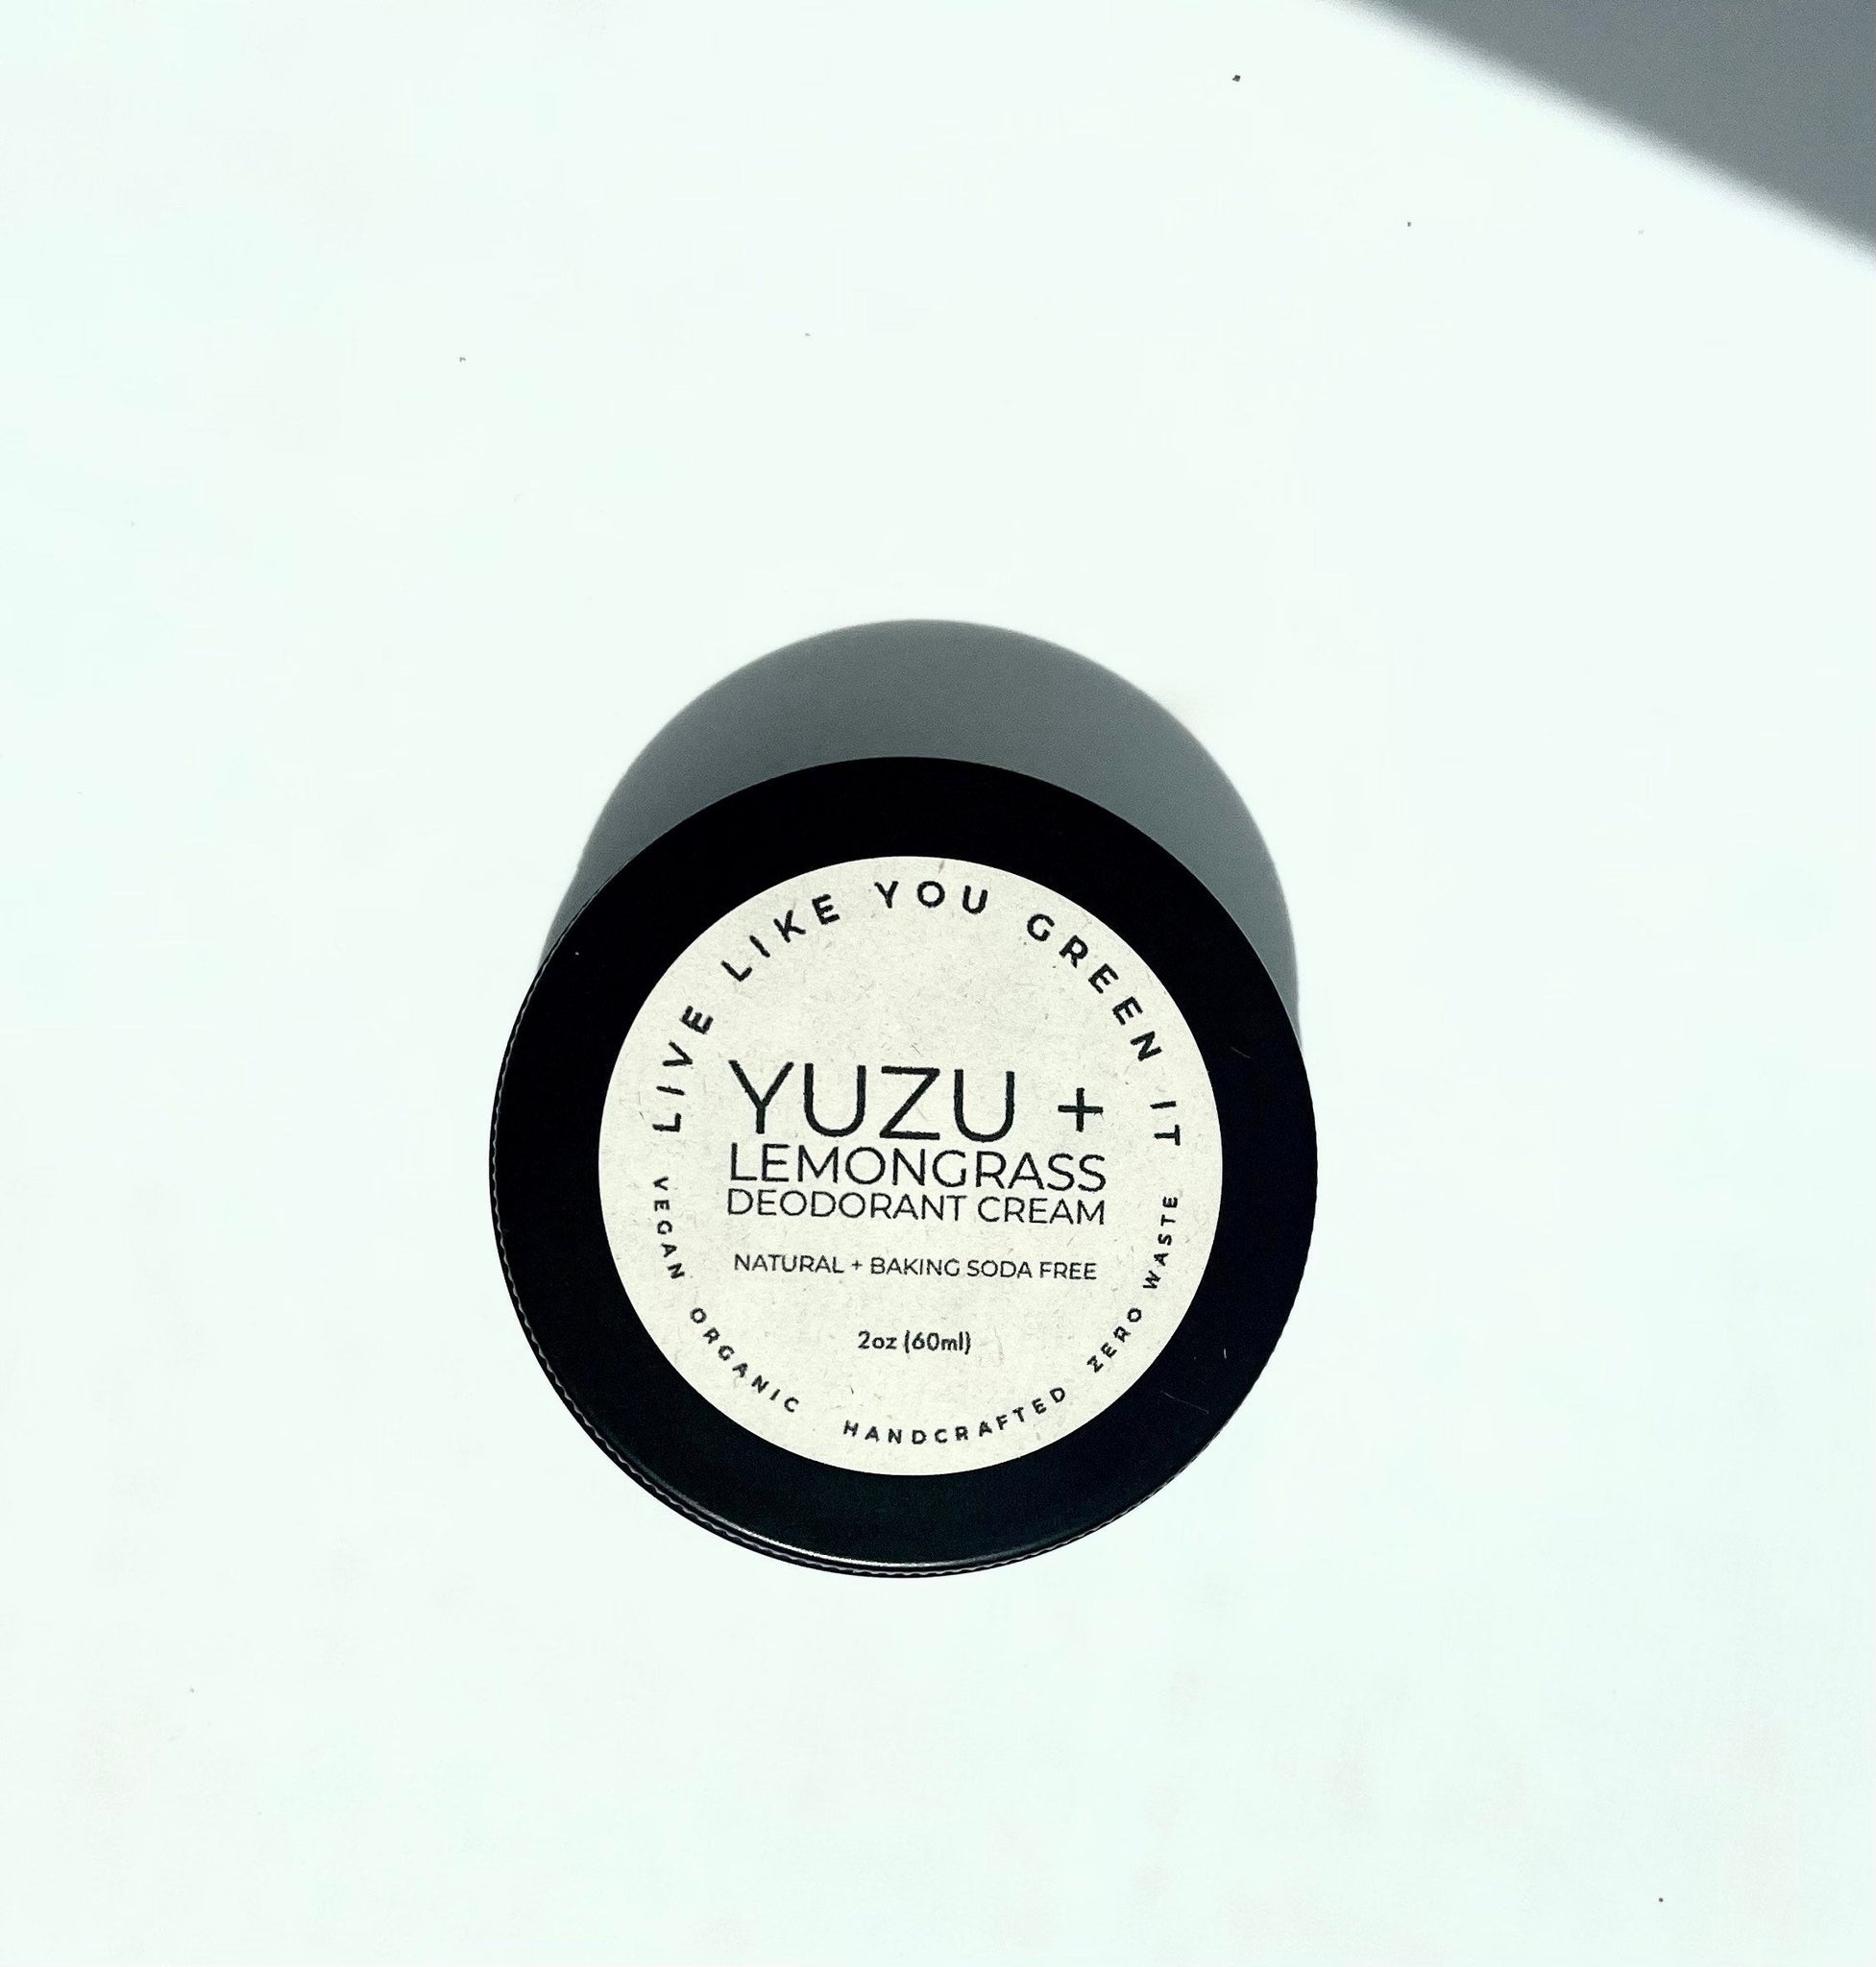 Deodorant That Works! | Yuzu & Lemongrass | All Day Protection | No Baking Soda Or Aluminum Live Like You Green It